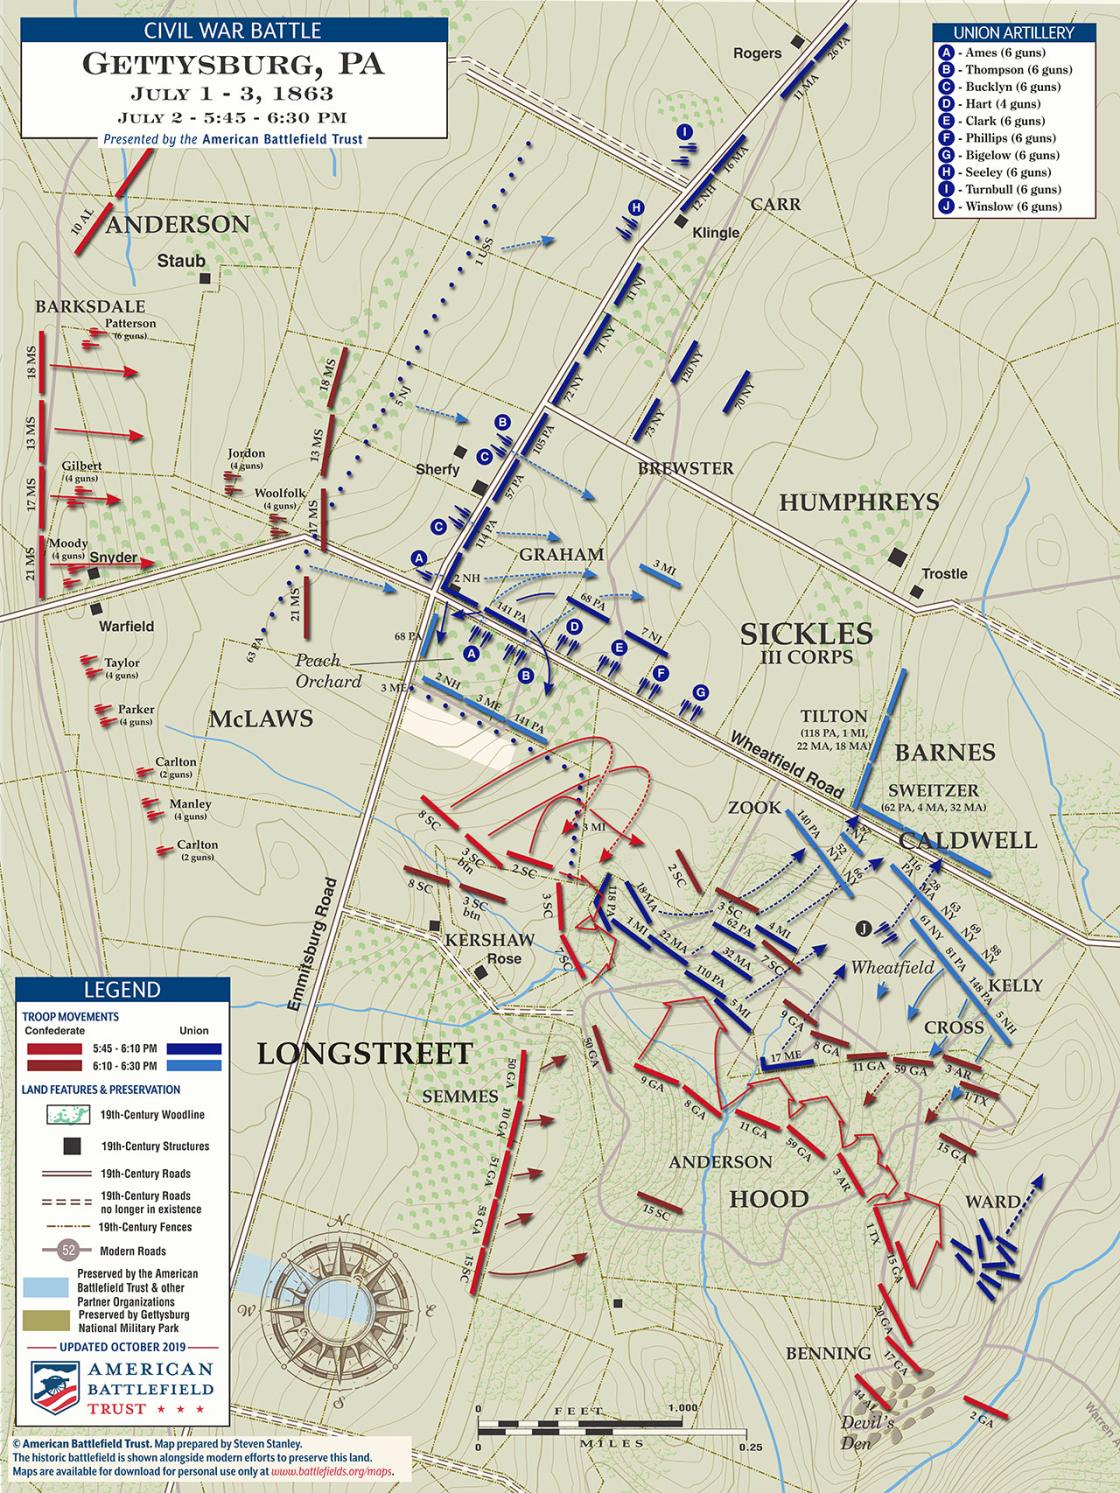 Gettysburg | The Wheatfield & Peach Orchard | July 2, 1863 | 5:45 - 6:30 pm (October 2019)